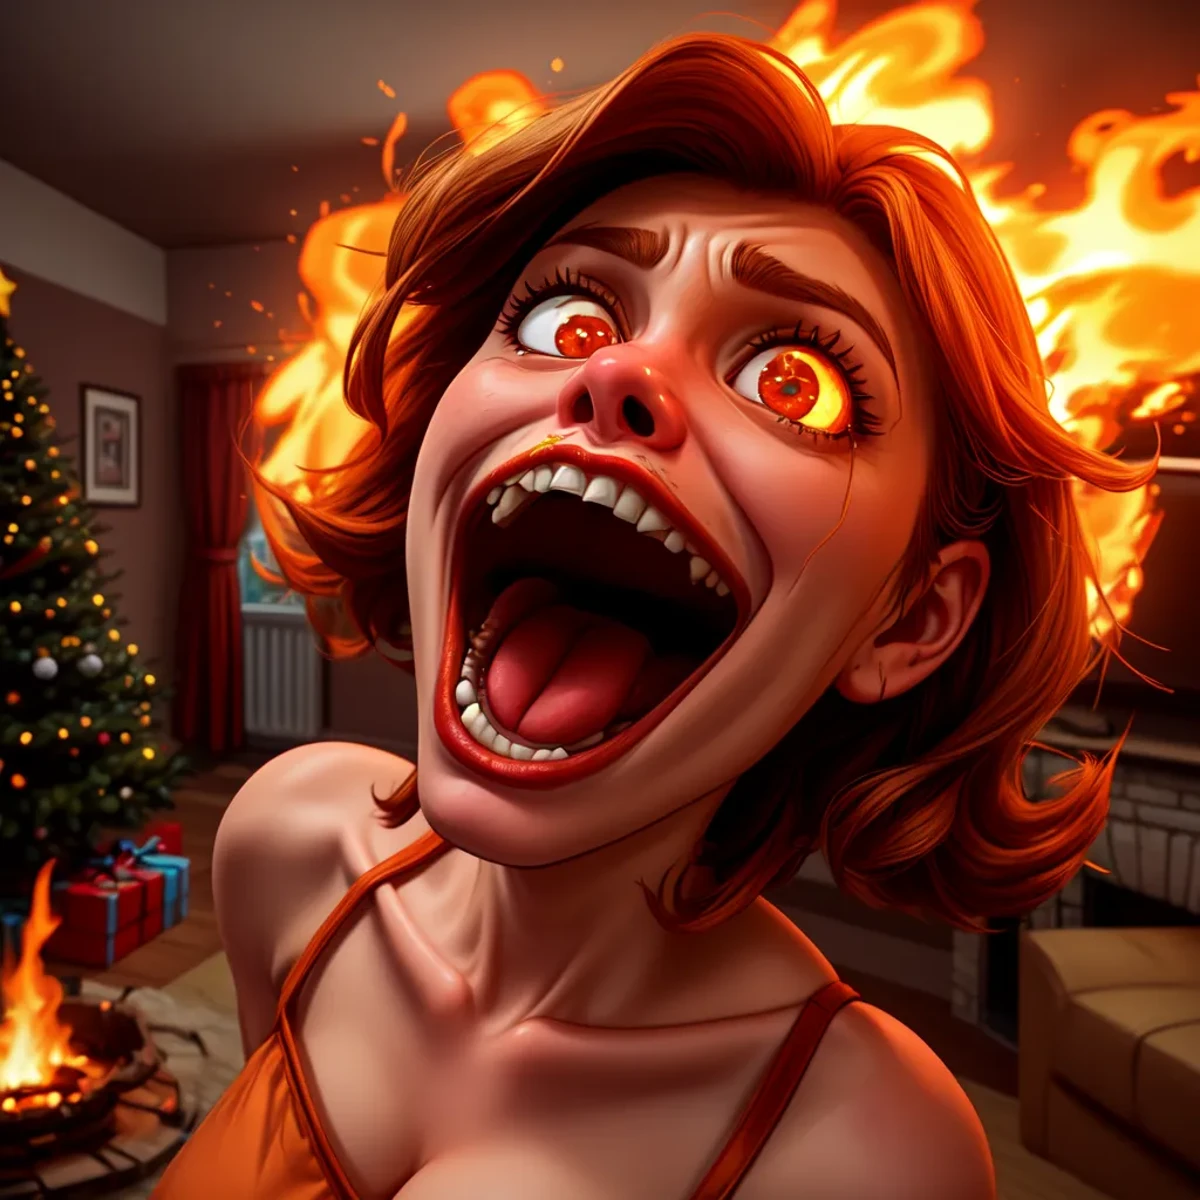 Full shot. Dutch angle A standing woman with a shocked, open mouth expression in the style of a cartoon: mouth wide open, her mouth wide open looking at a burning Christmas tree in the middle of a room.. In the style of a cartoon: wide open mouth jaw dropped open exagerated face expression. the background is a room on fire, thick orange smoke